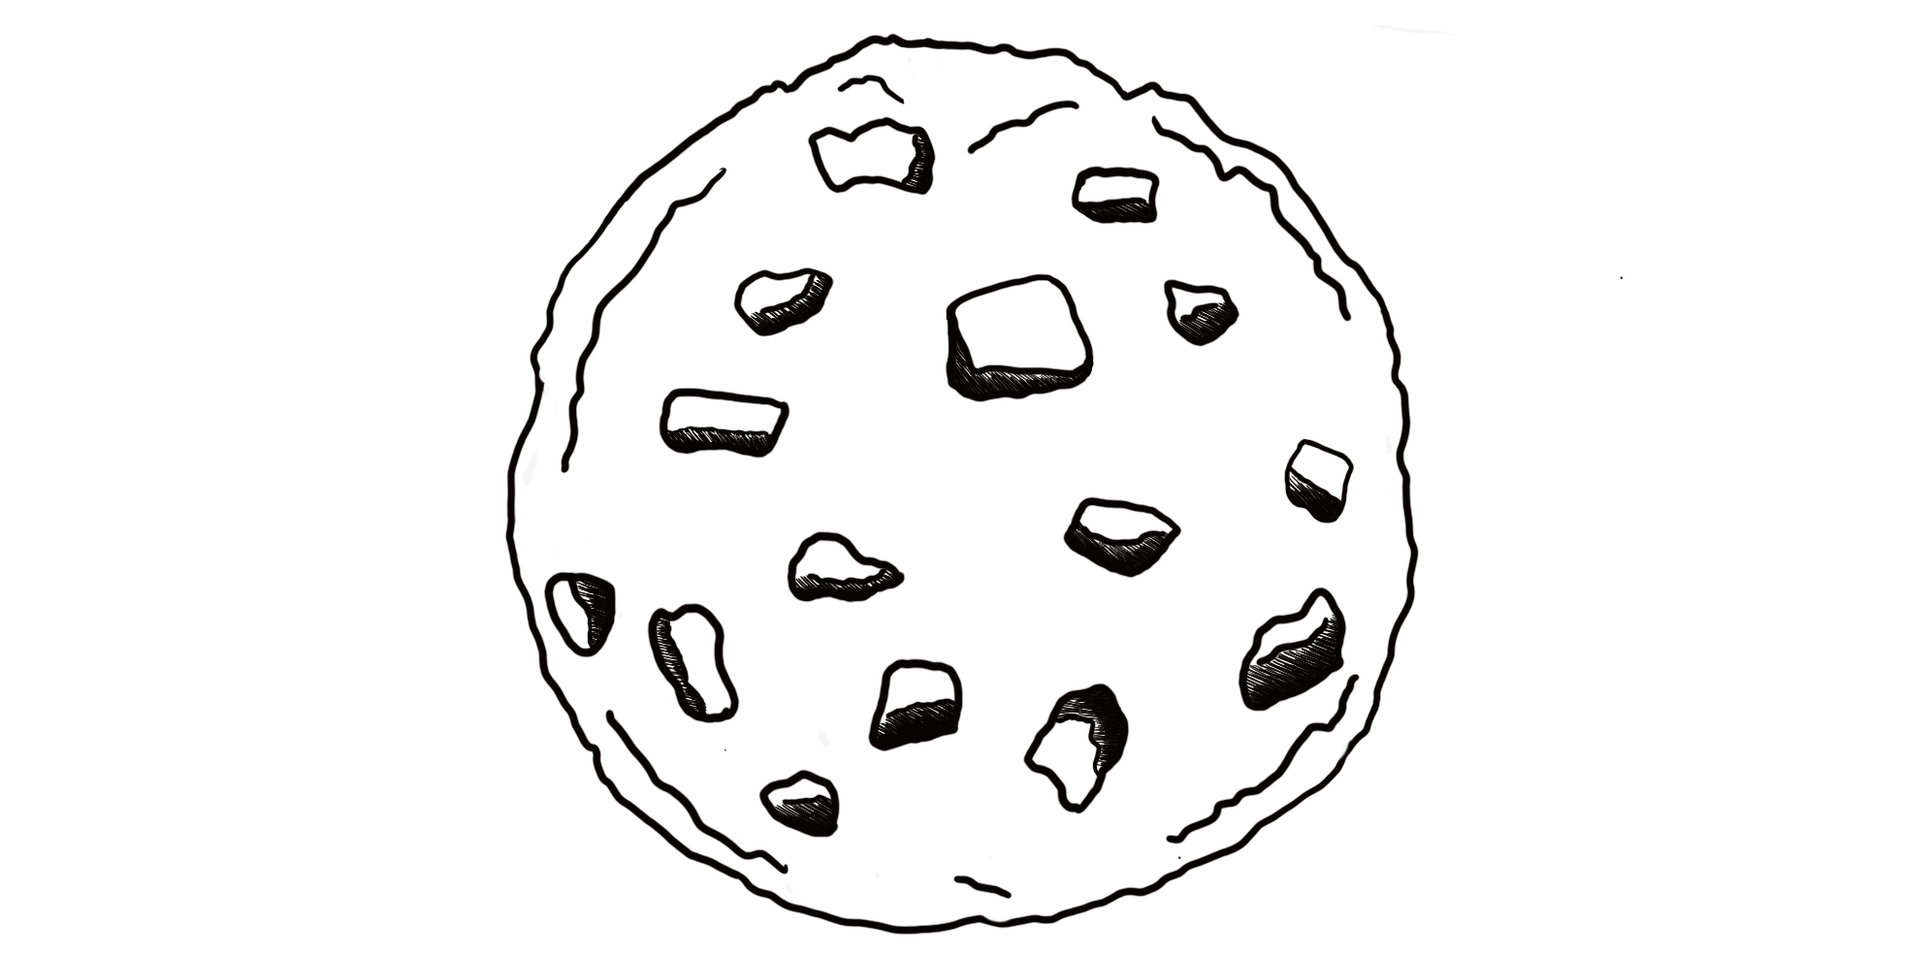 Illustration of a chocolate chip cookie